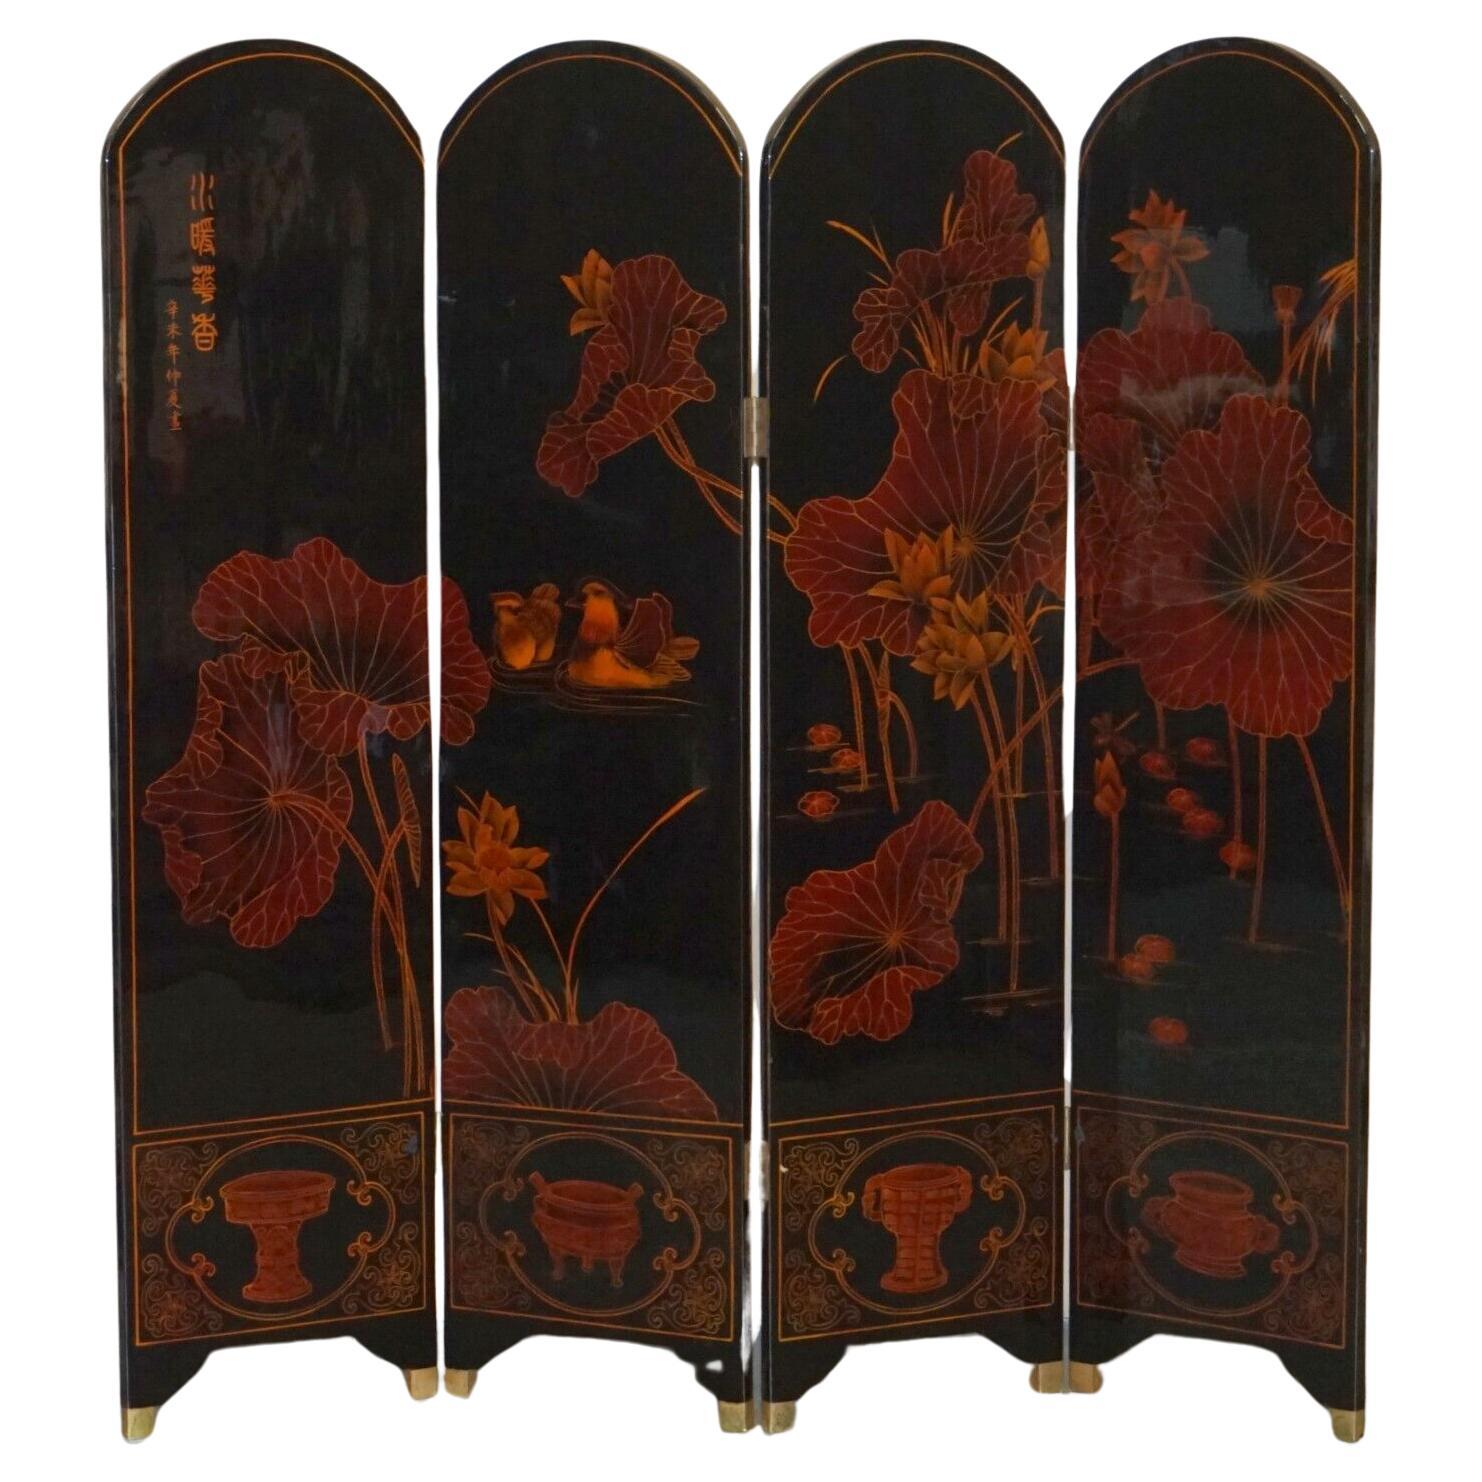 FINE ANTIQUE ROOM DIVIDER TITLED IN CHINESE "MIDSUMMER PAiNTING OF XINWEI YEAR" For Sale